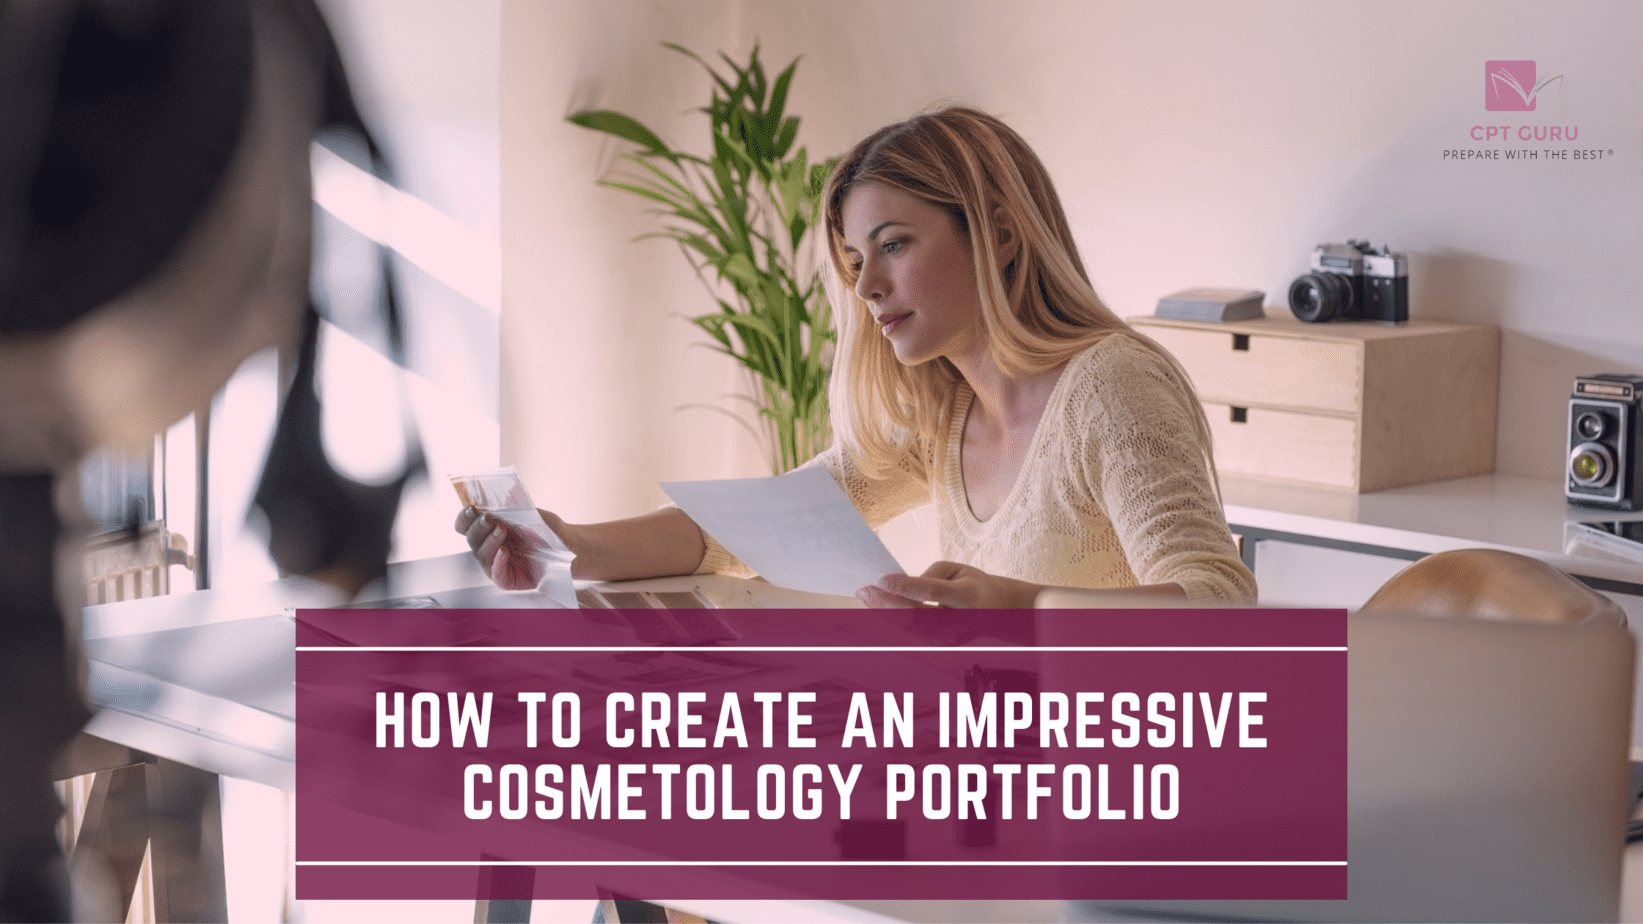 What to include in your cosmetology portfolio?